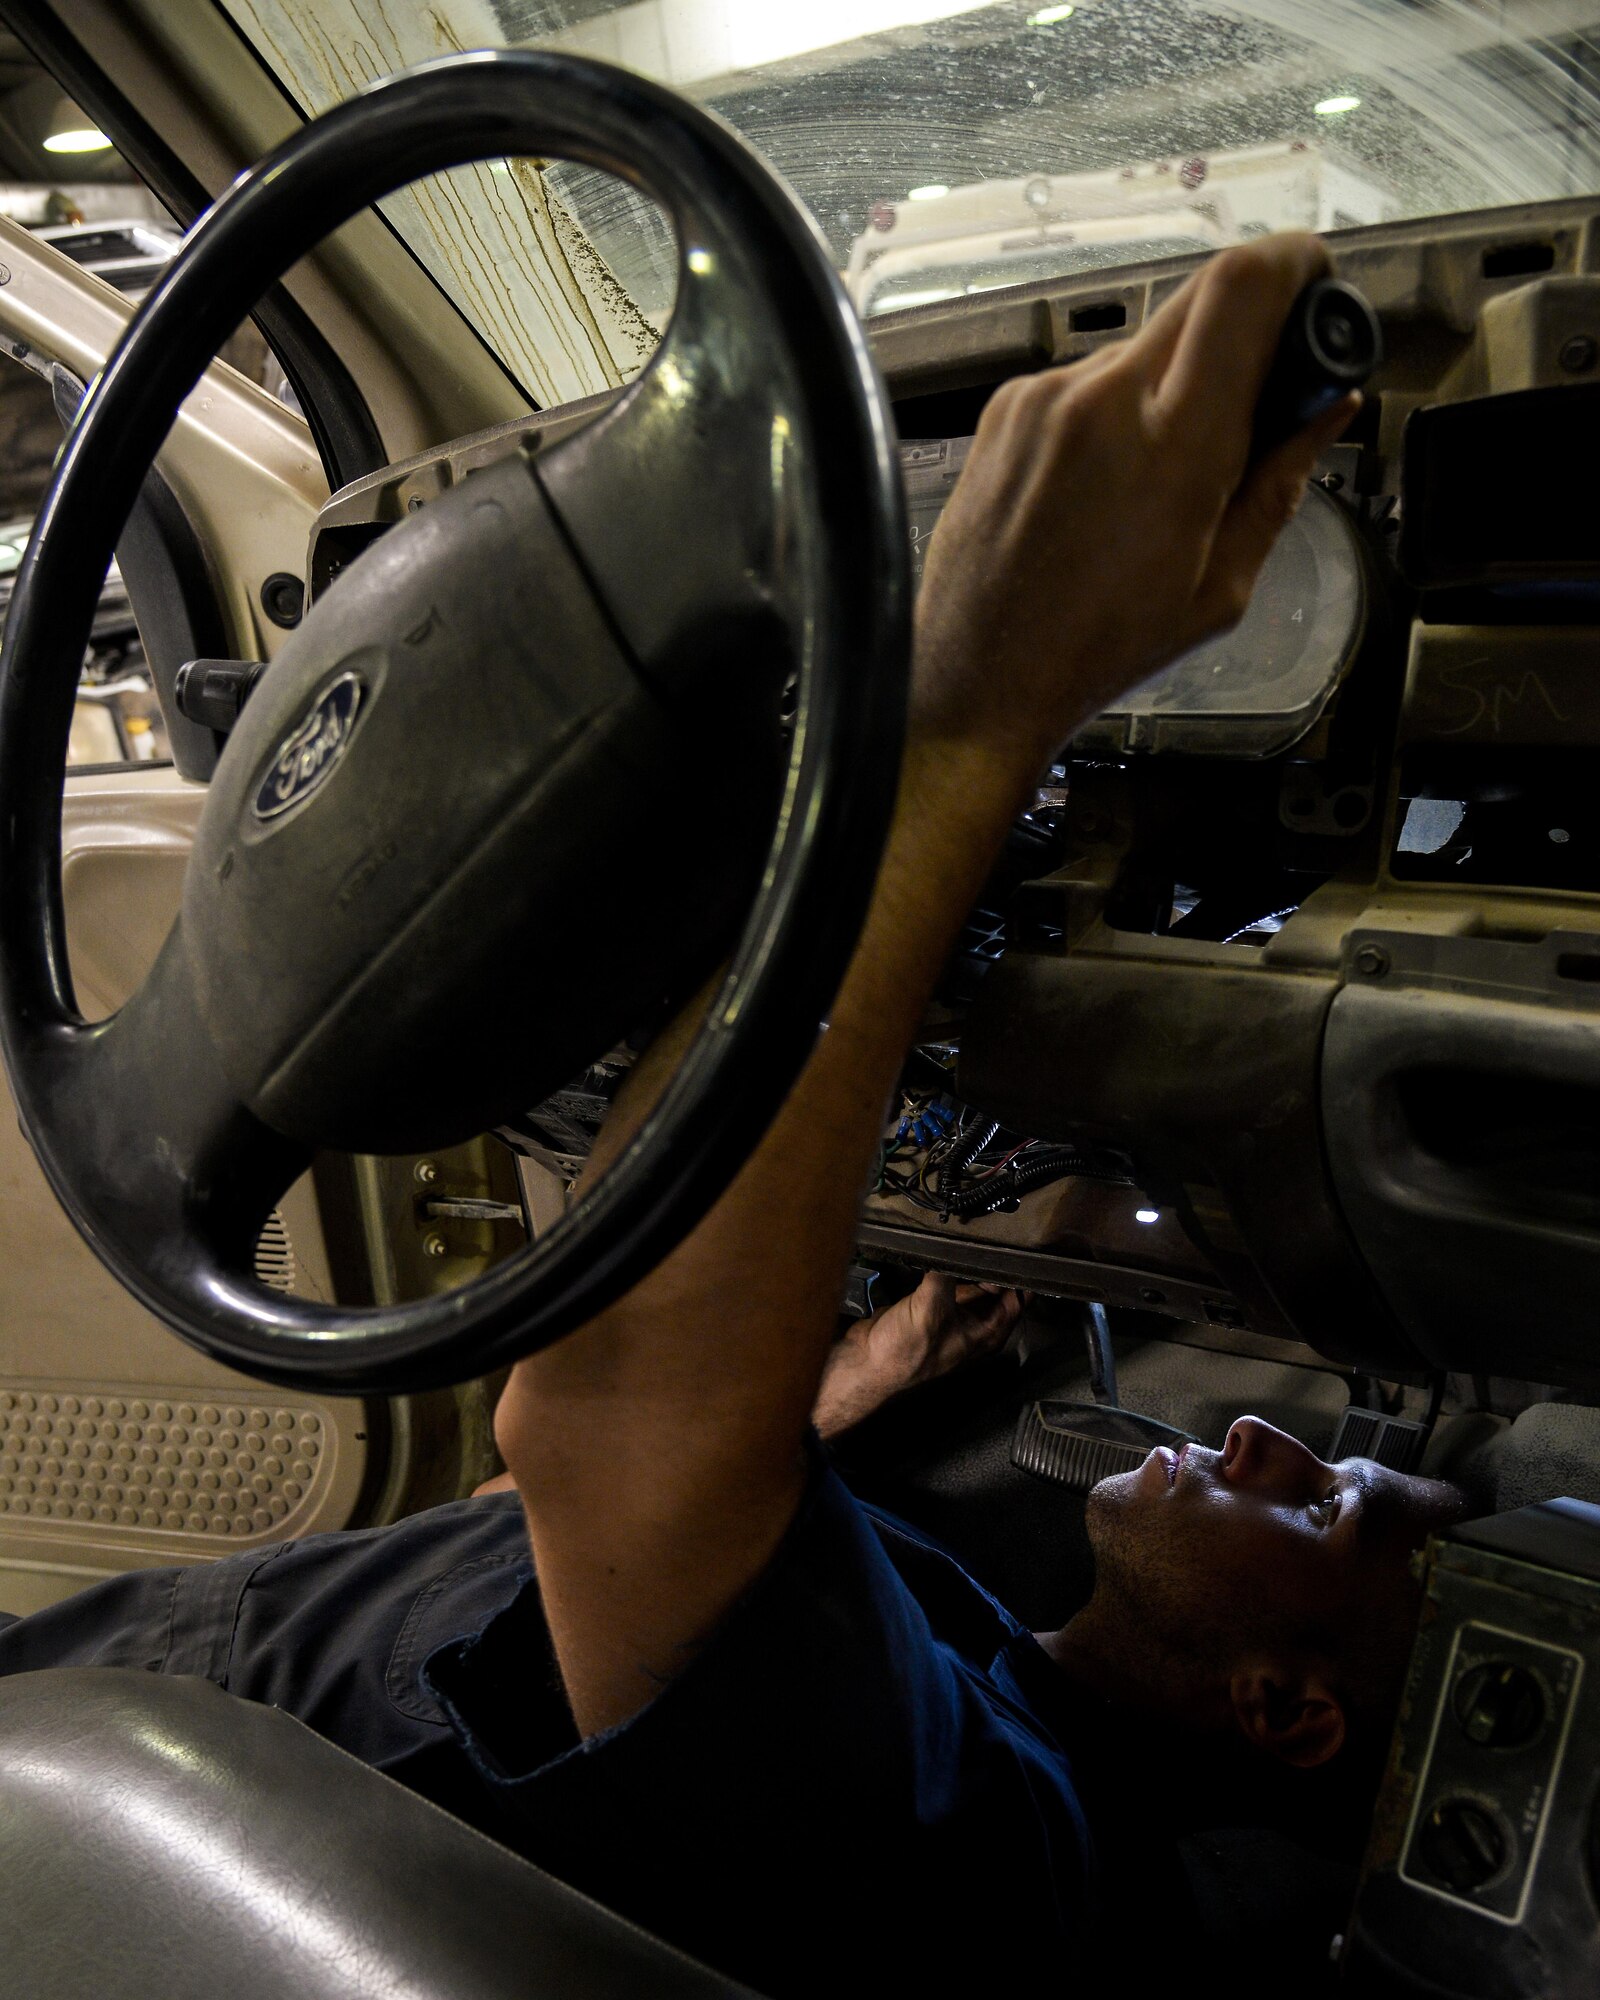 Senior Airman Nathan installs a shift tube on a truck at an undisclosed location in Southwest Asia July 17, 2015. SrA Nathan is a vehicle mechanic assigned to the 380th Expeditionary Logistics Readiness Squadron. (U.S. Air Force photo/Tech. Sgt. Christopher Boitz)